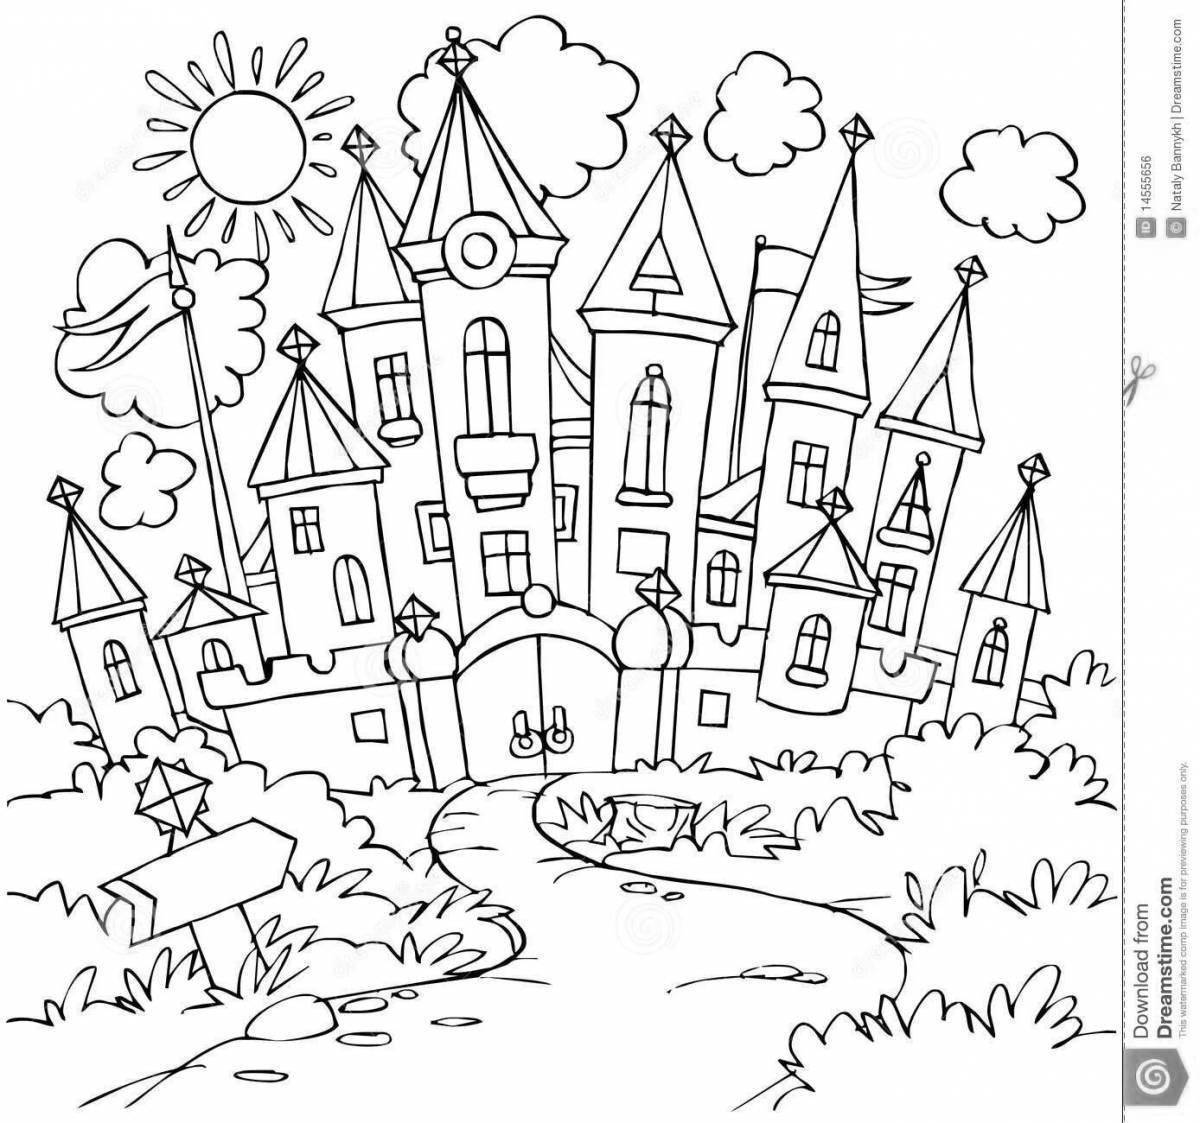 Vibrant city coloring book for kids